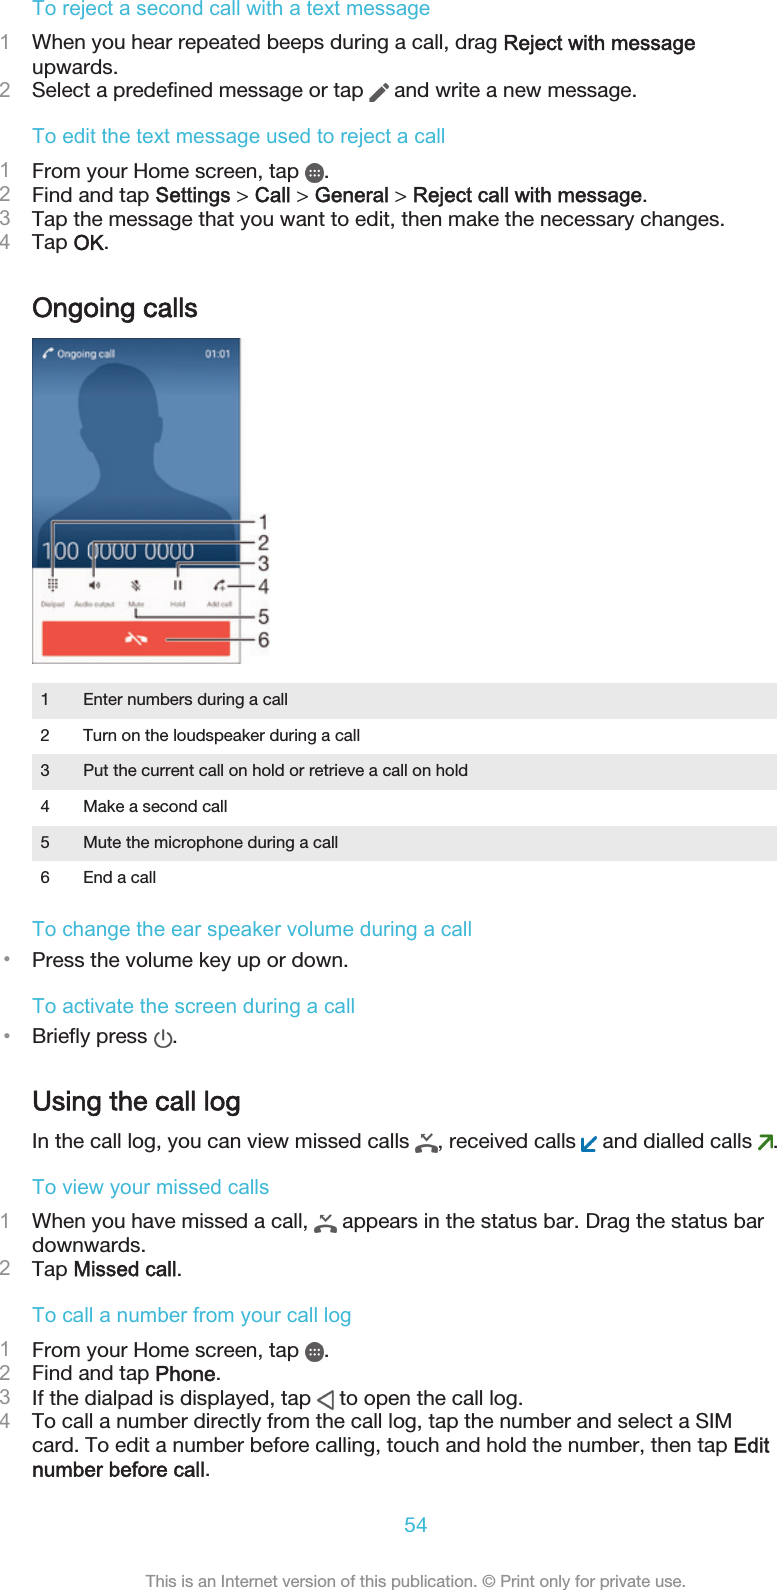 To reject a second call with a text message1When you hear repeated beeps during a call, drag Reject with messageupwards.2Select a predefined message or tap   and write a new message.To edit the text message used to reject a call1From your Home screen, tap  .2Find and tap Settings &gt; Call &gt; General &gt; Reject call with message.3Tap the message that you want to edit, then make the necessary changes.4Tap OK.Ongoing calls1 Enter numbers during a call2 Turn on the loudspeaker during a call3 Put the current call on hold or retrieve a call on hold4 Make a second call5 Mute the microphone during a call6 End a callTo change the ear speaker volume during a call•Press the volume key up or down.To activate the screen during a call•Briefly press  .Using the call logIn the call log, you can view missed calls  , received calls   and dialled calls  .To view your missed calls1When you have missed a call,   appears in the status bar. Drag the status bardownwards.2Tap Missed call.To call a number from your call log1From your Home screen, tap  .2Find and tap Phone.3If the dialpad is displayed, tap   to open the call log.4To call a number directly from the call log, tap the number and select a SIMcard. To edit a number before calling, touch and hold the number, then tap Editnumber before call.54This is an Internet version of this publication. © Print only for private use.